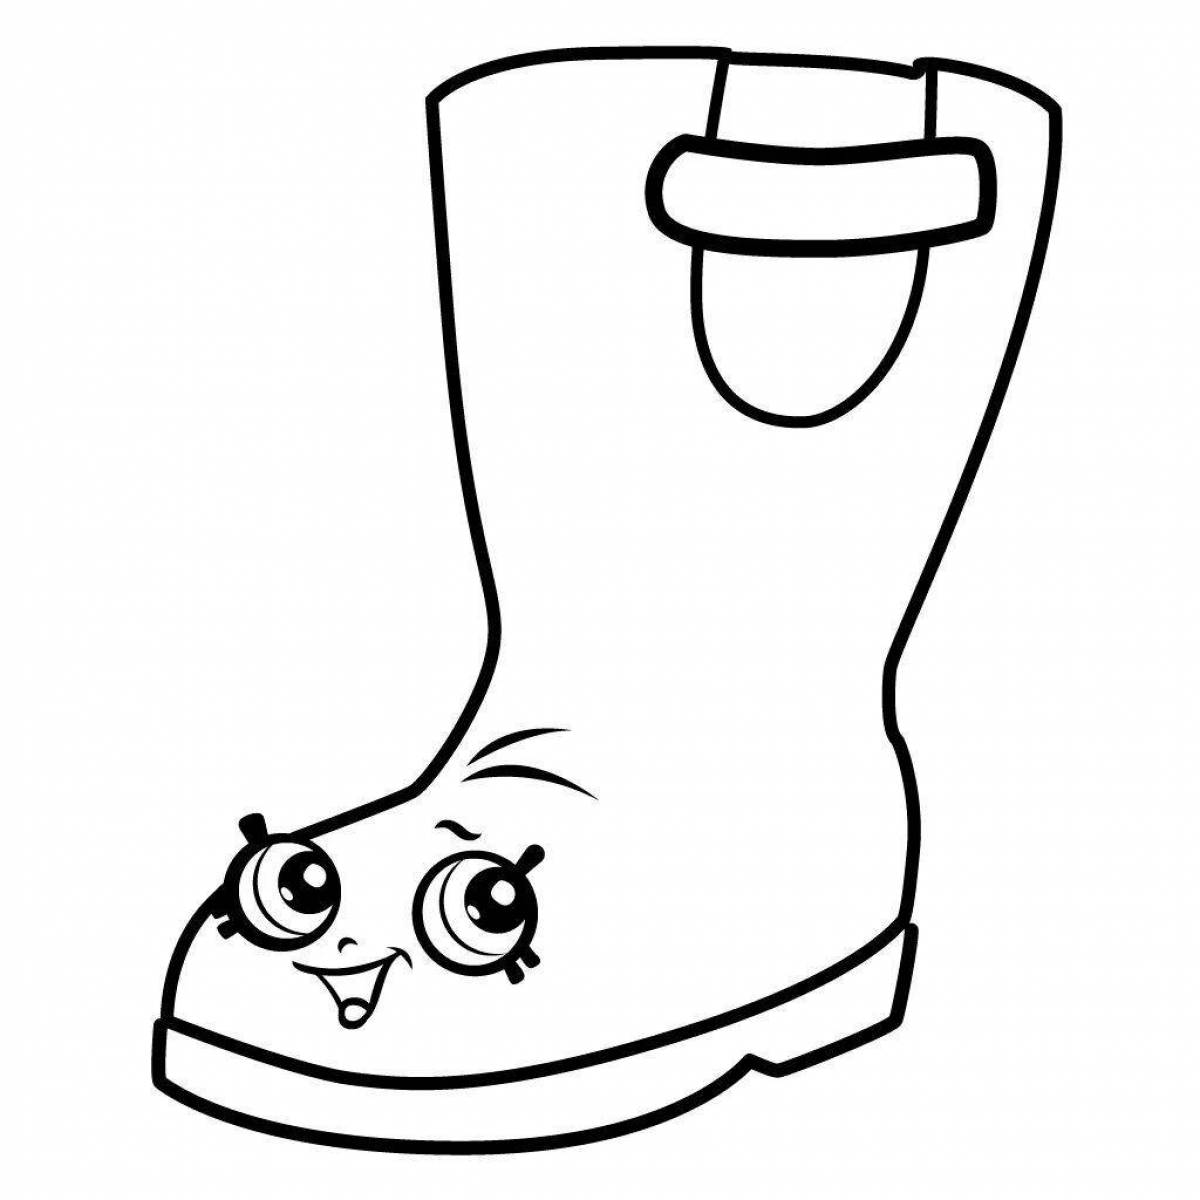 Coloring page joyful rubber boots